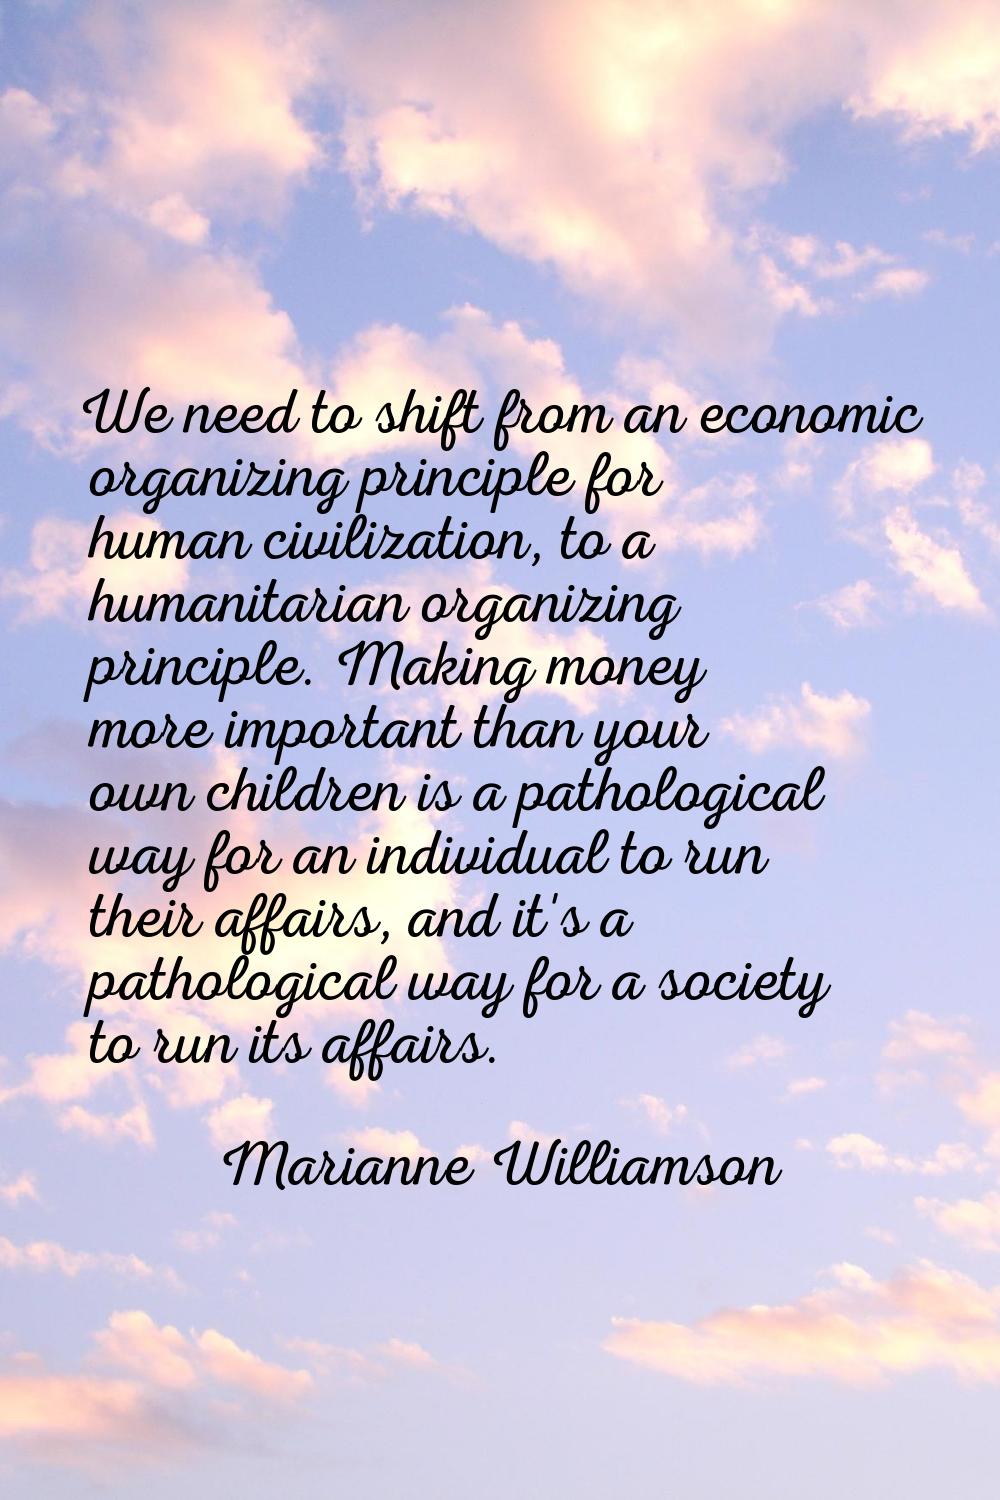 We need to shift from an economic organizing principle for human civilization, to a humanitarian or